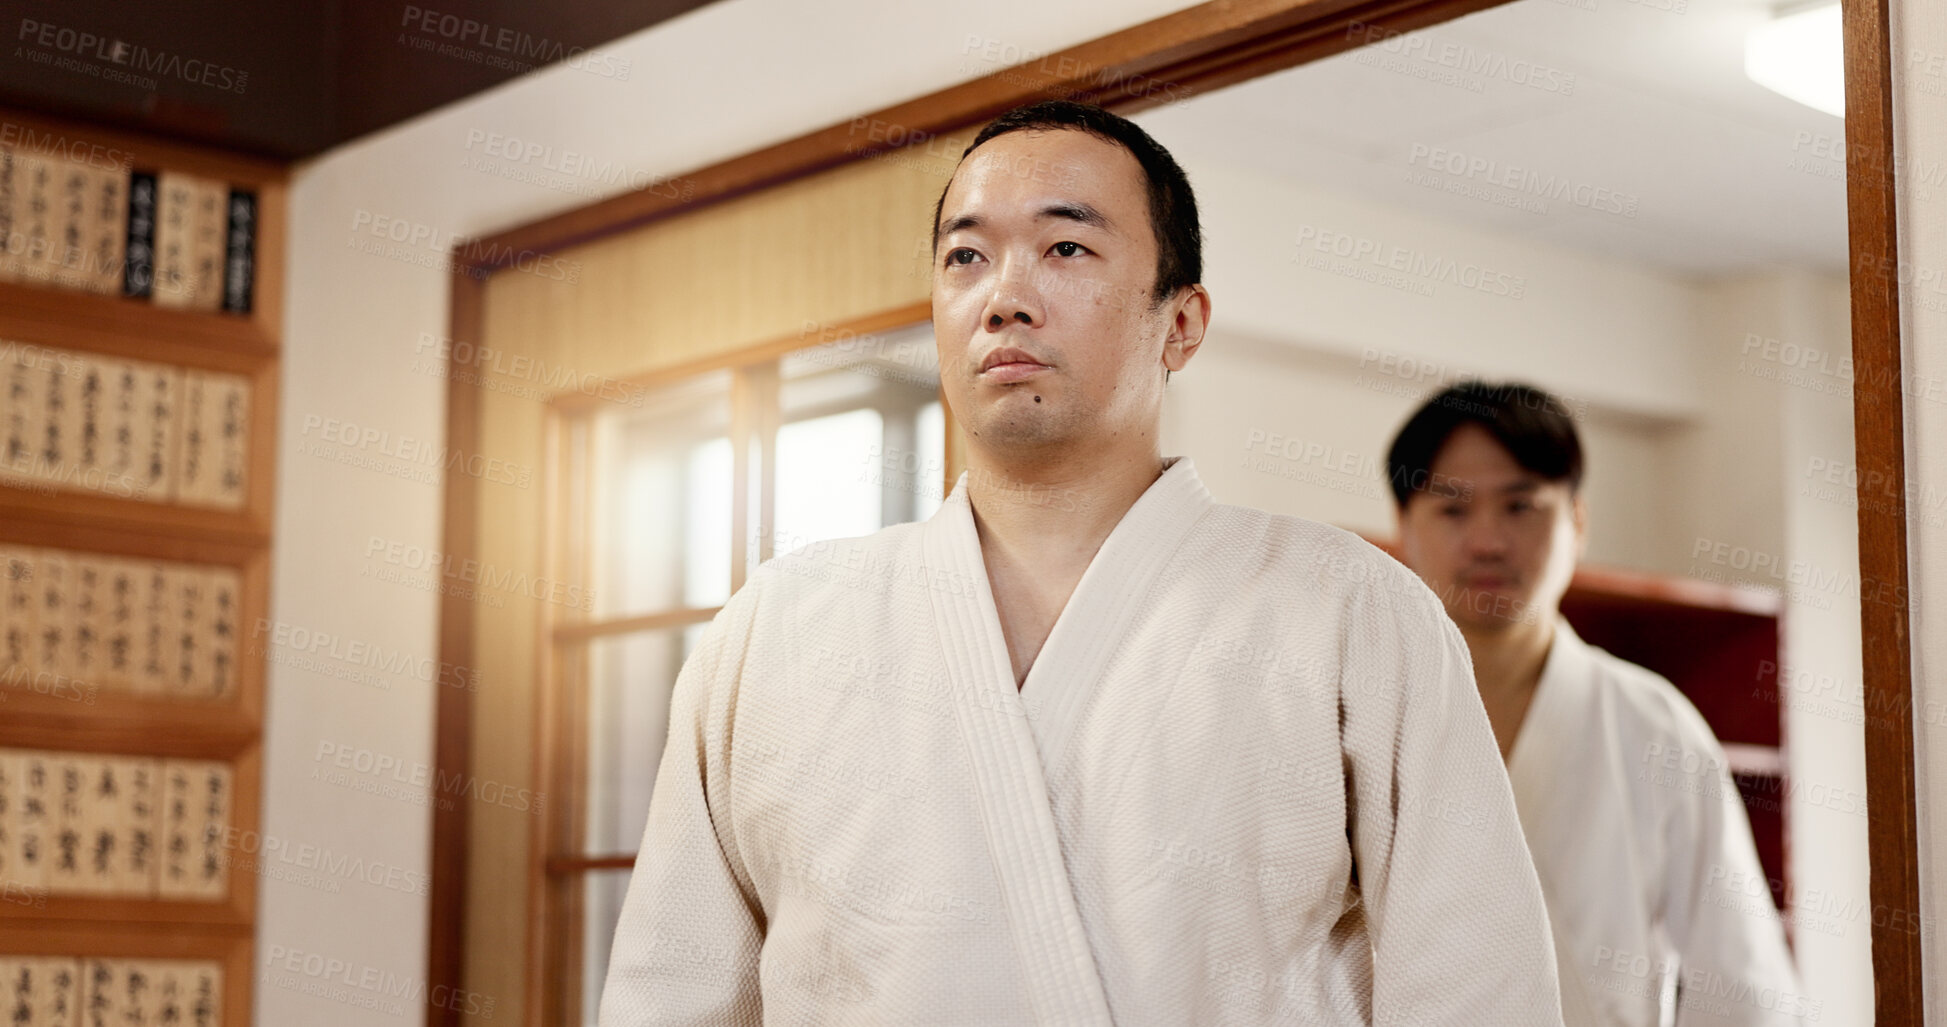 Buy stock photo Aikido student, ready or men in dojo to start practice, discipline or self defense education in Japan. Master, people learning sports or athletes walking in fighting class, lesson or training